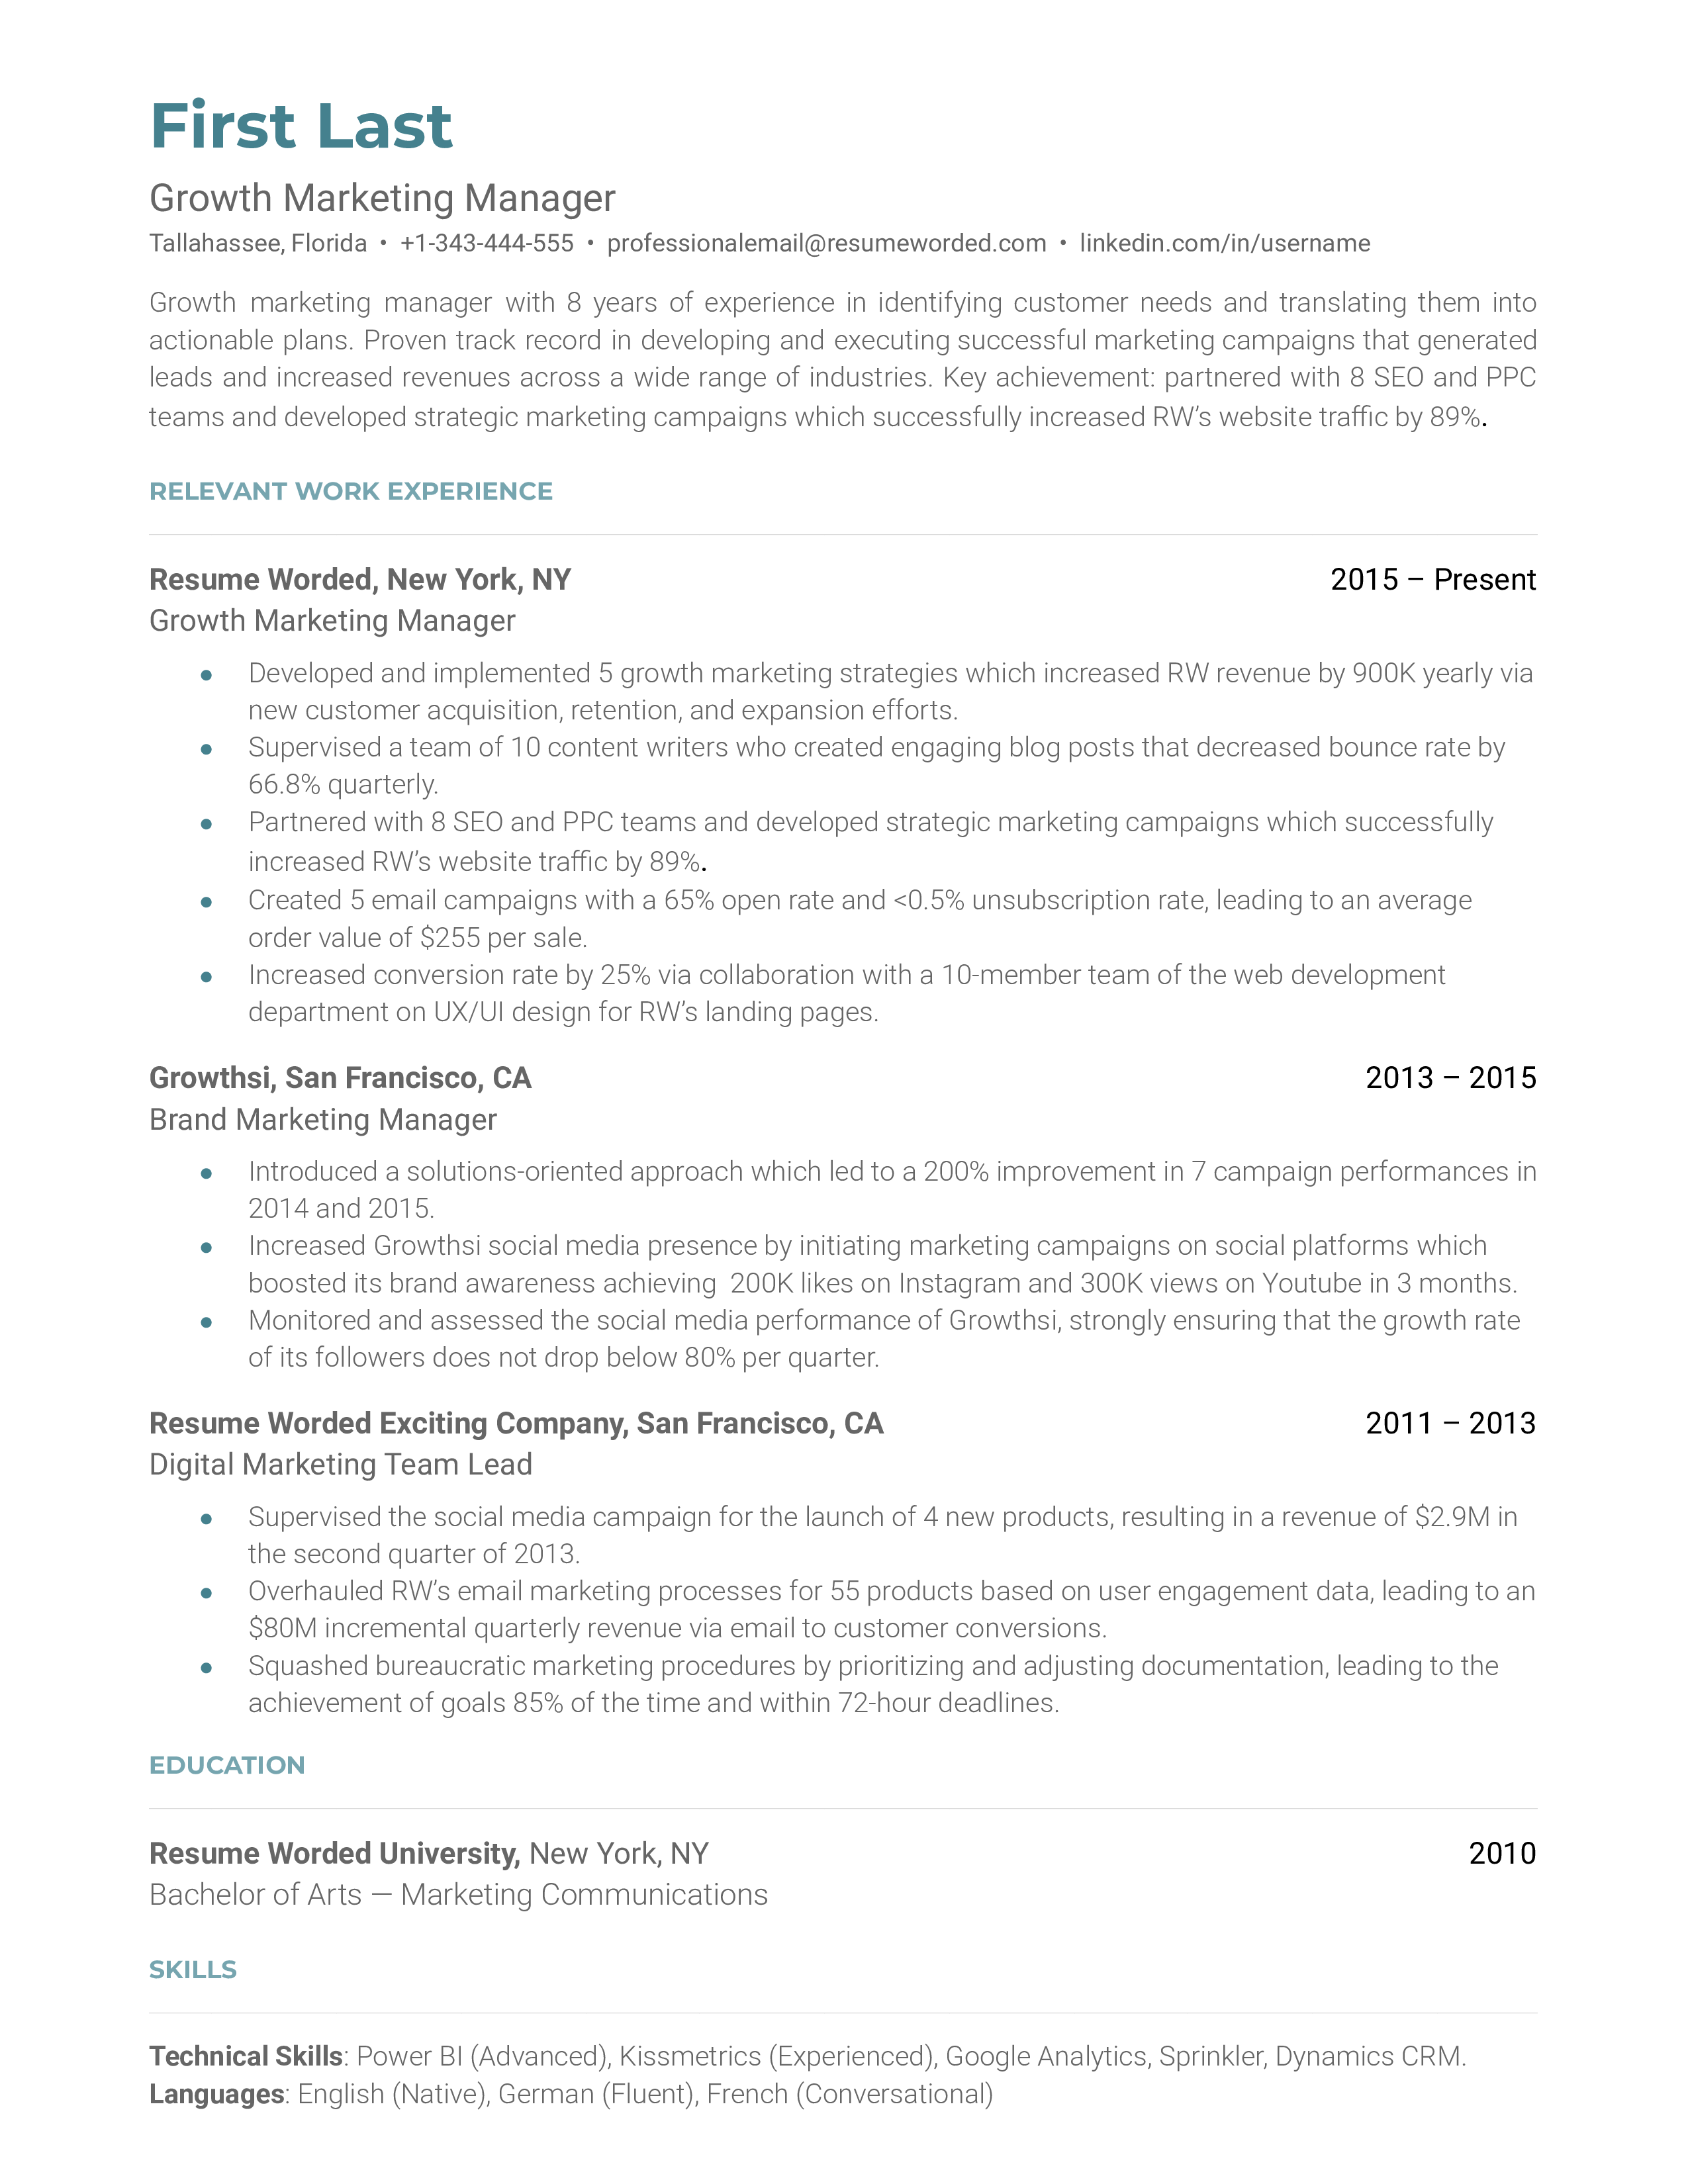 Growth Marketing Manager's CV demonstrating data-driven skills and successful growth experiments.